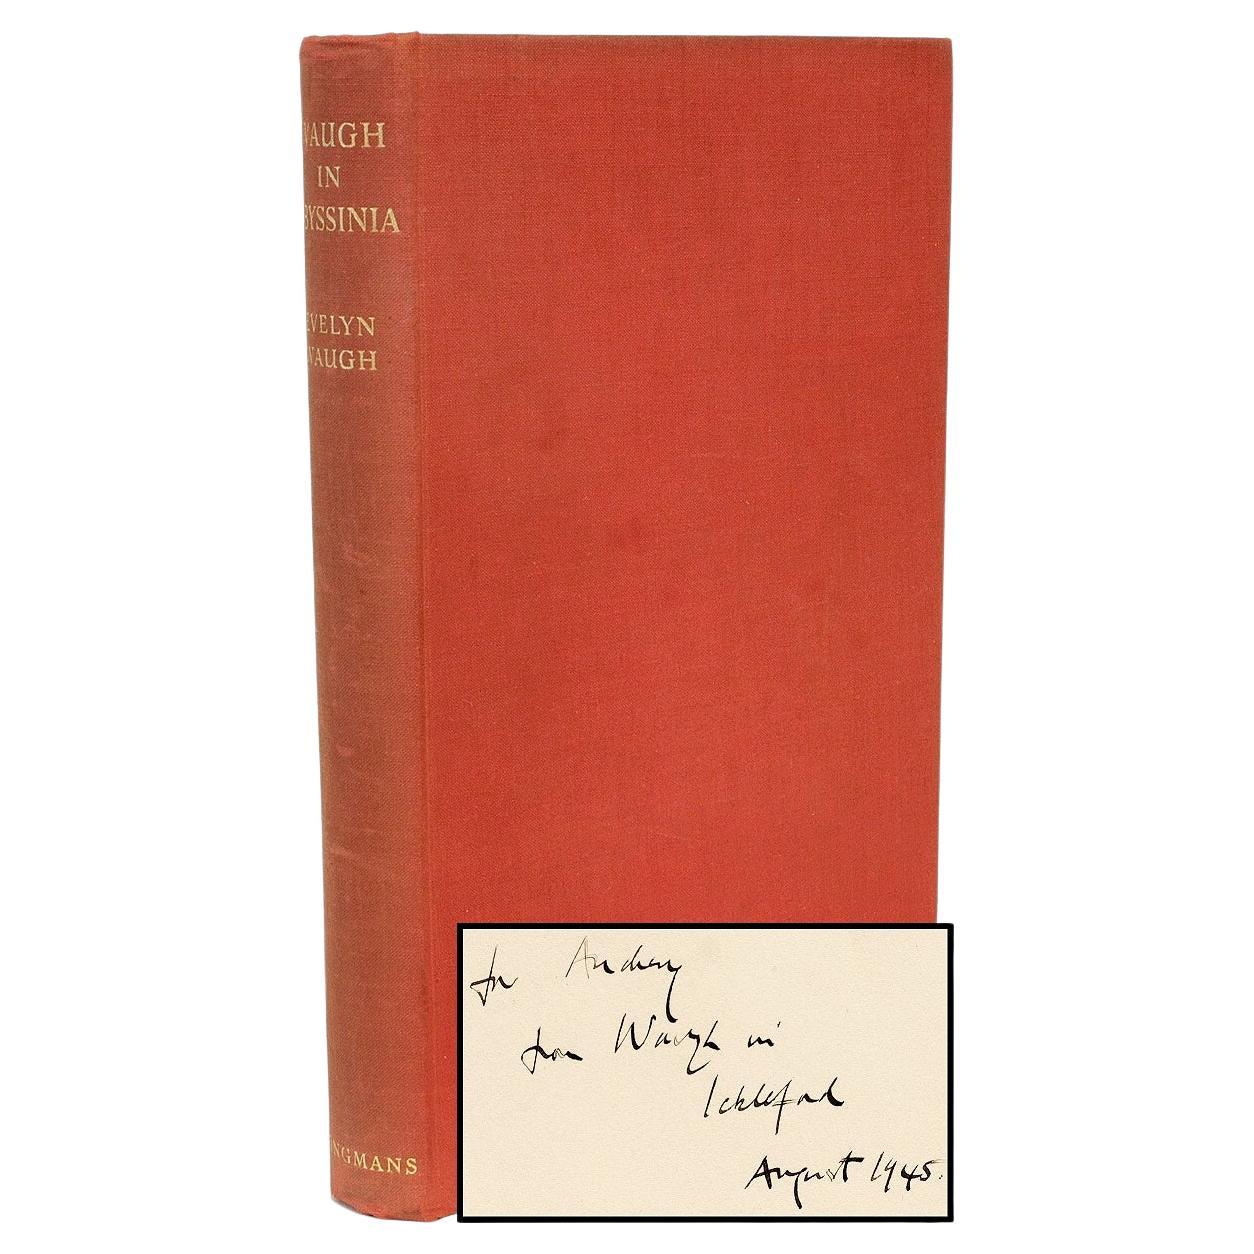 Waugh, Evelyn, Waugh in Abyssinia, First Edition, Presentation Copy, 1936